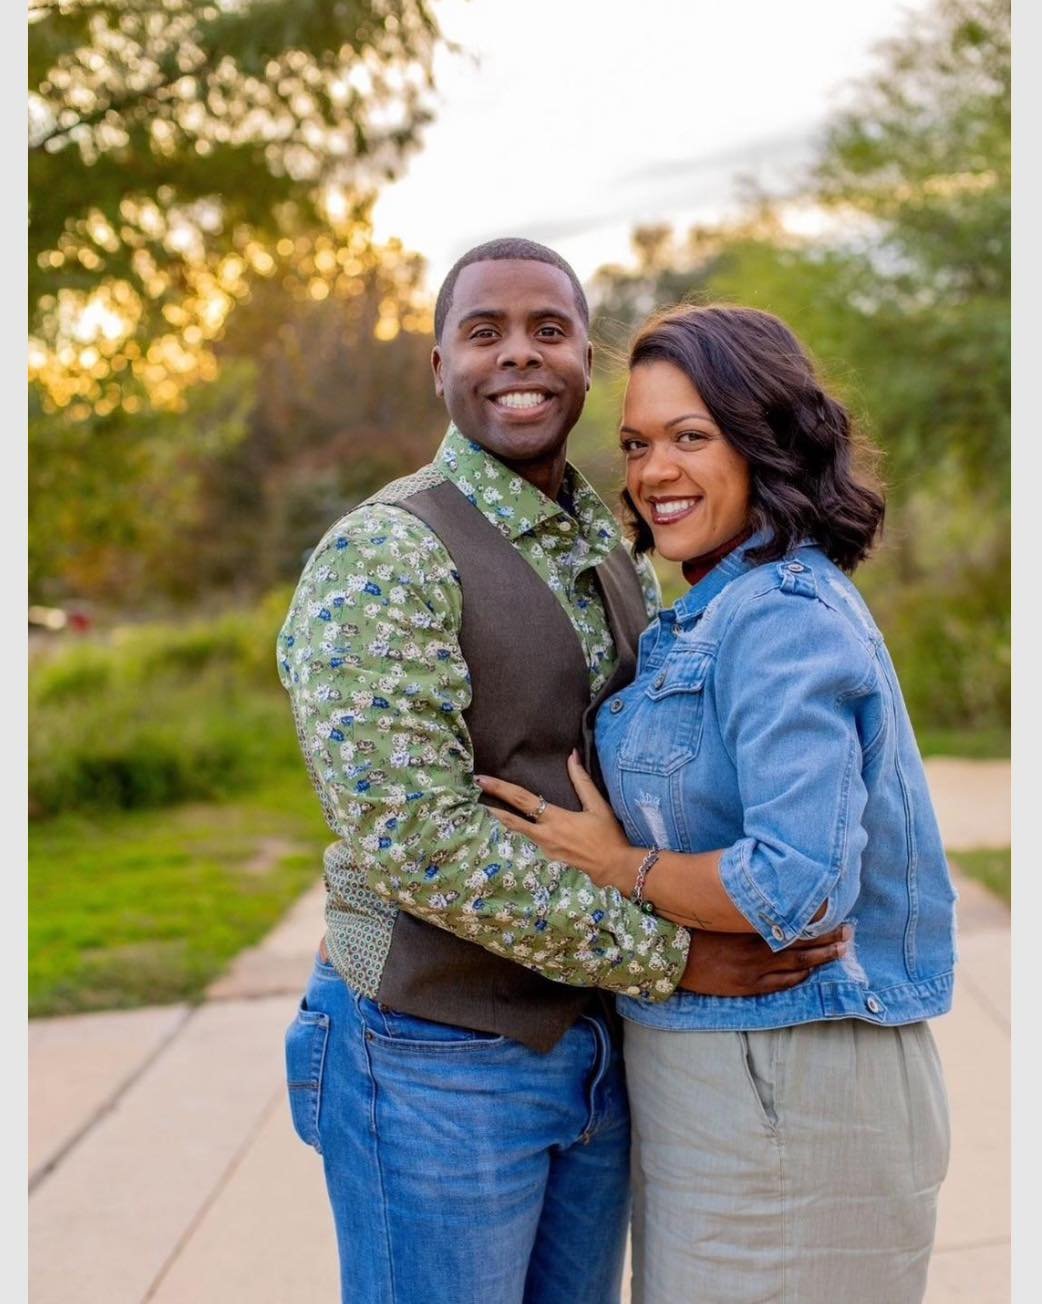 Join us TOMORROW at Alamo City!

Guest Teaching Pastor Karl Albert Long will be preaching on &quot;Faith Fights Back&quot;

�And we are thrilled to have his wife Dayne Long, leading us in worship with our worship team! 

Don't Miss This Sunday at Ala